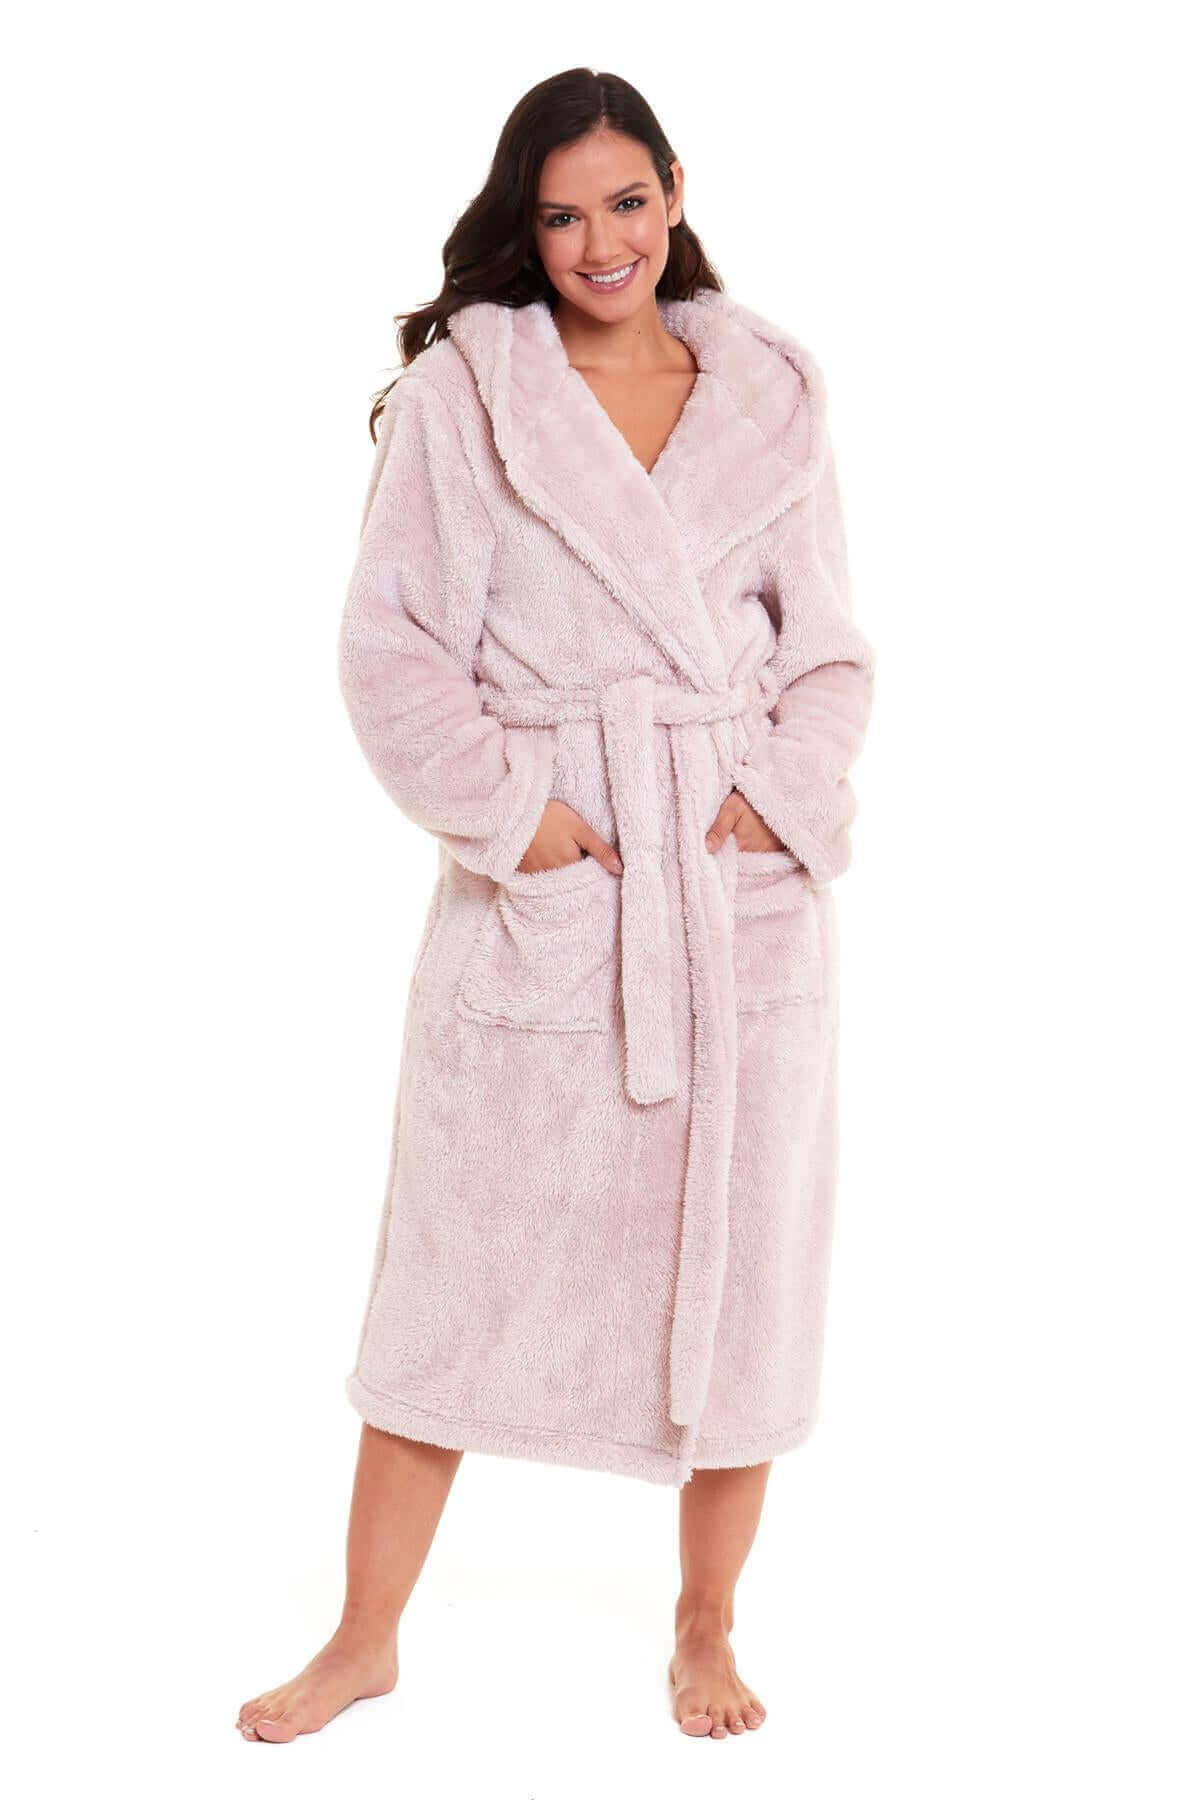 Kids' Dressing Gowns: 10 of the Best for Winter Warmth | ellaslist